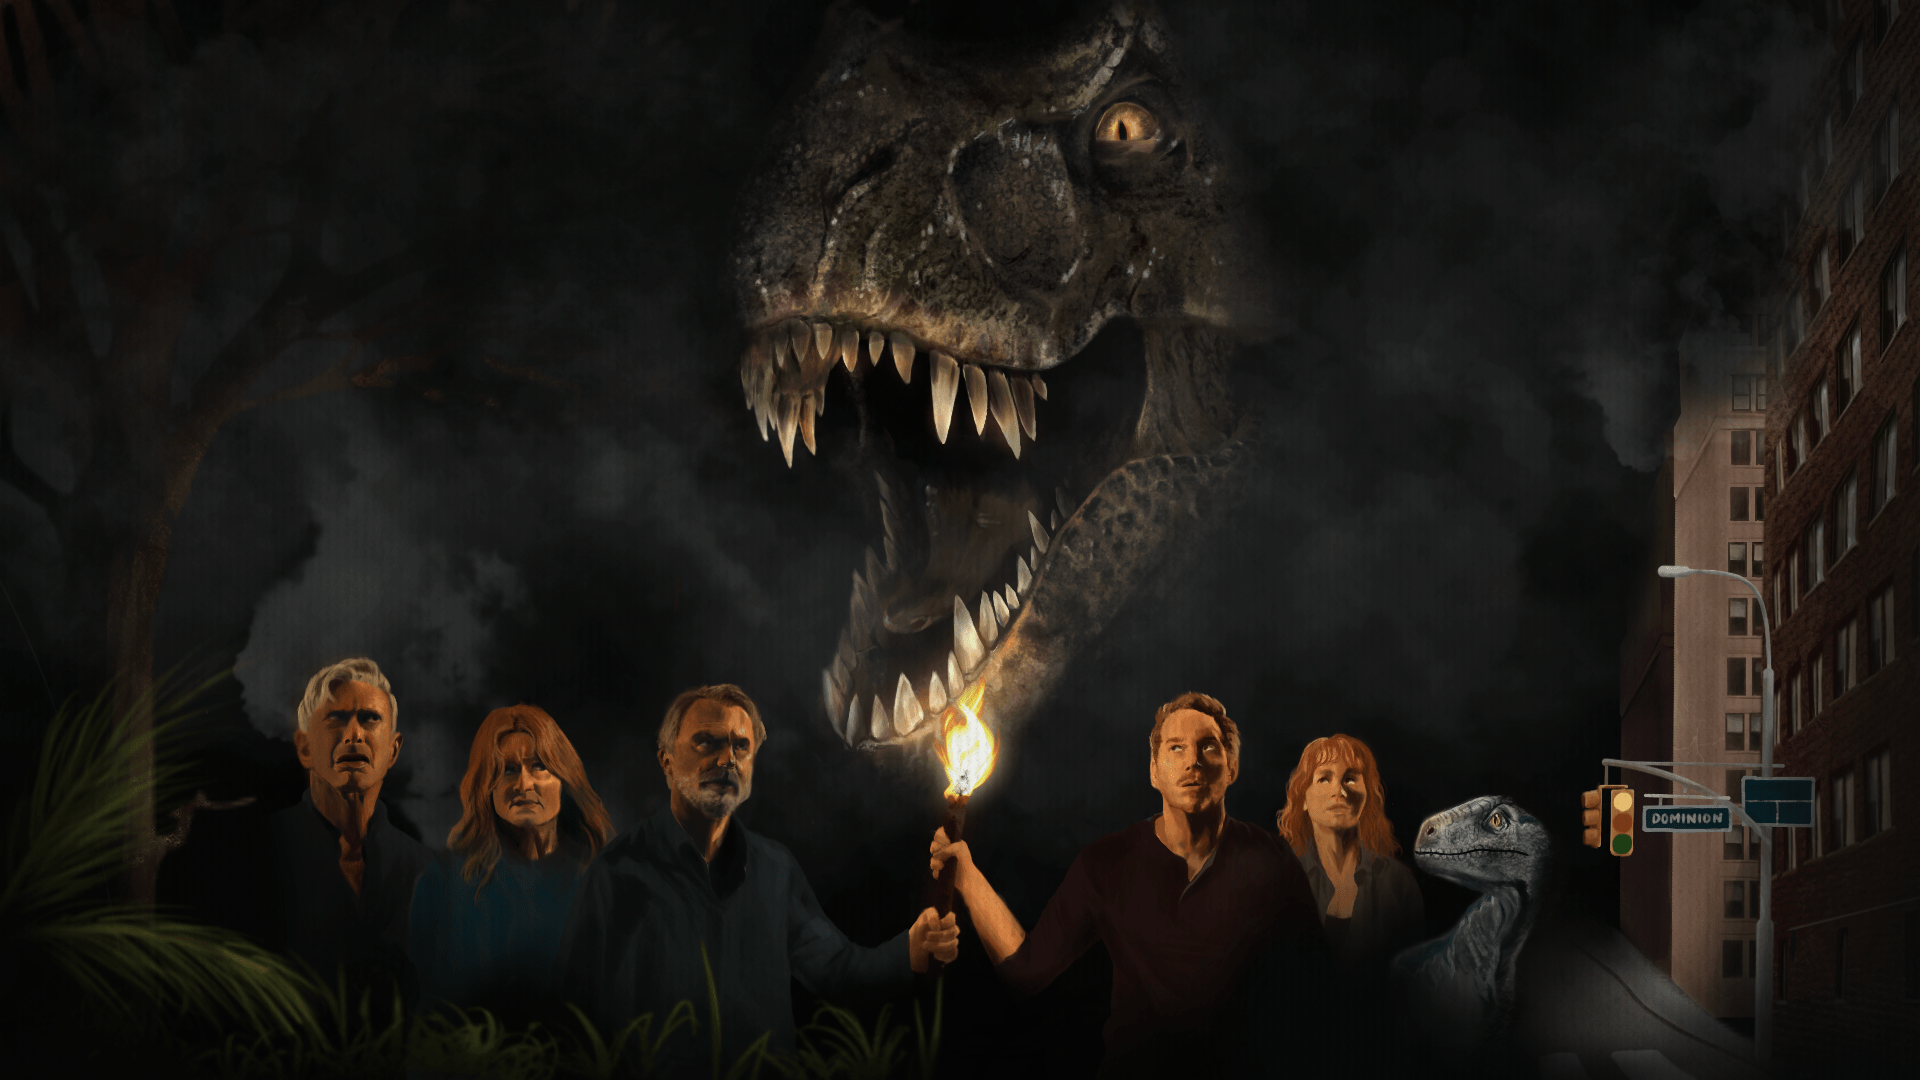 Rant and Rave: Dinosaurs take a back seat in franchise closer “Jurassic World Dominion”